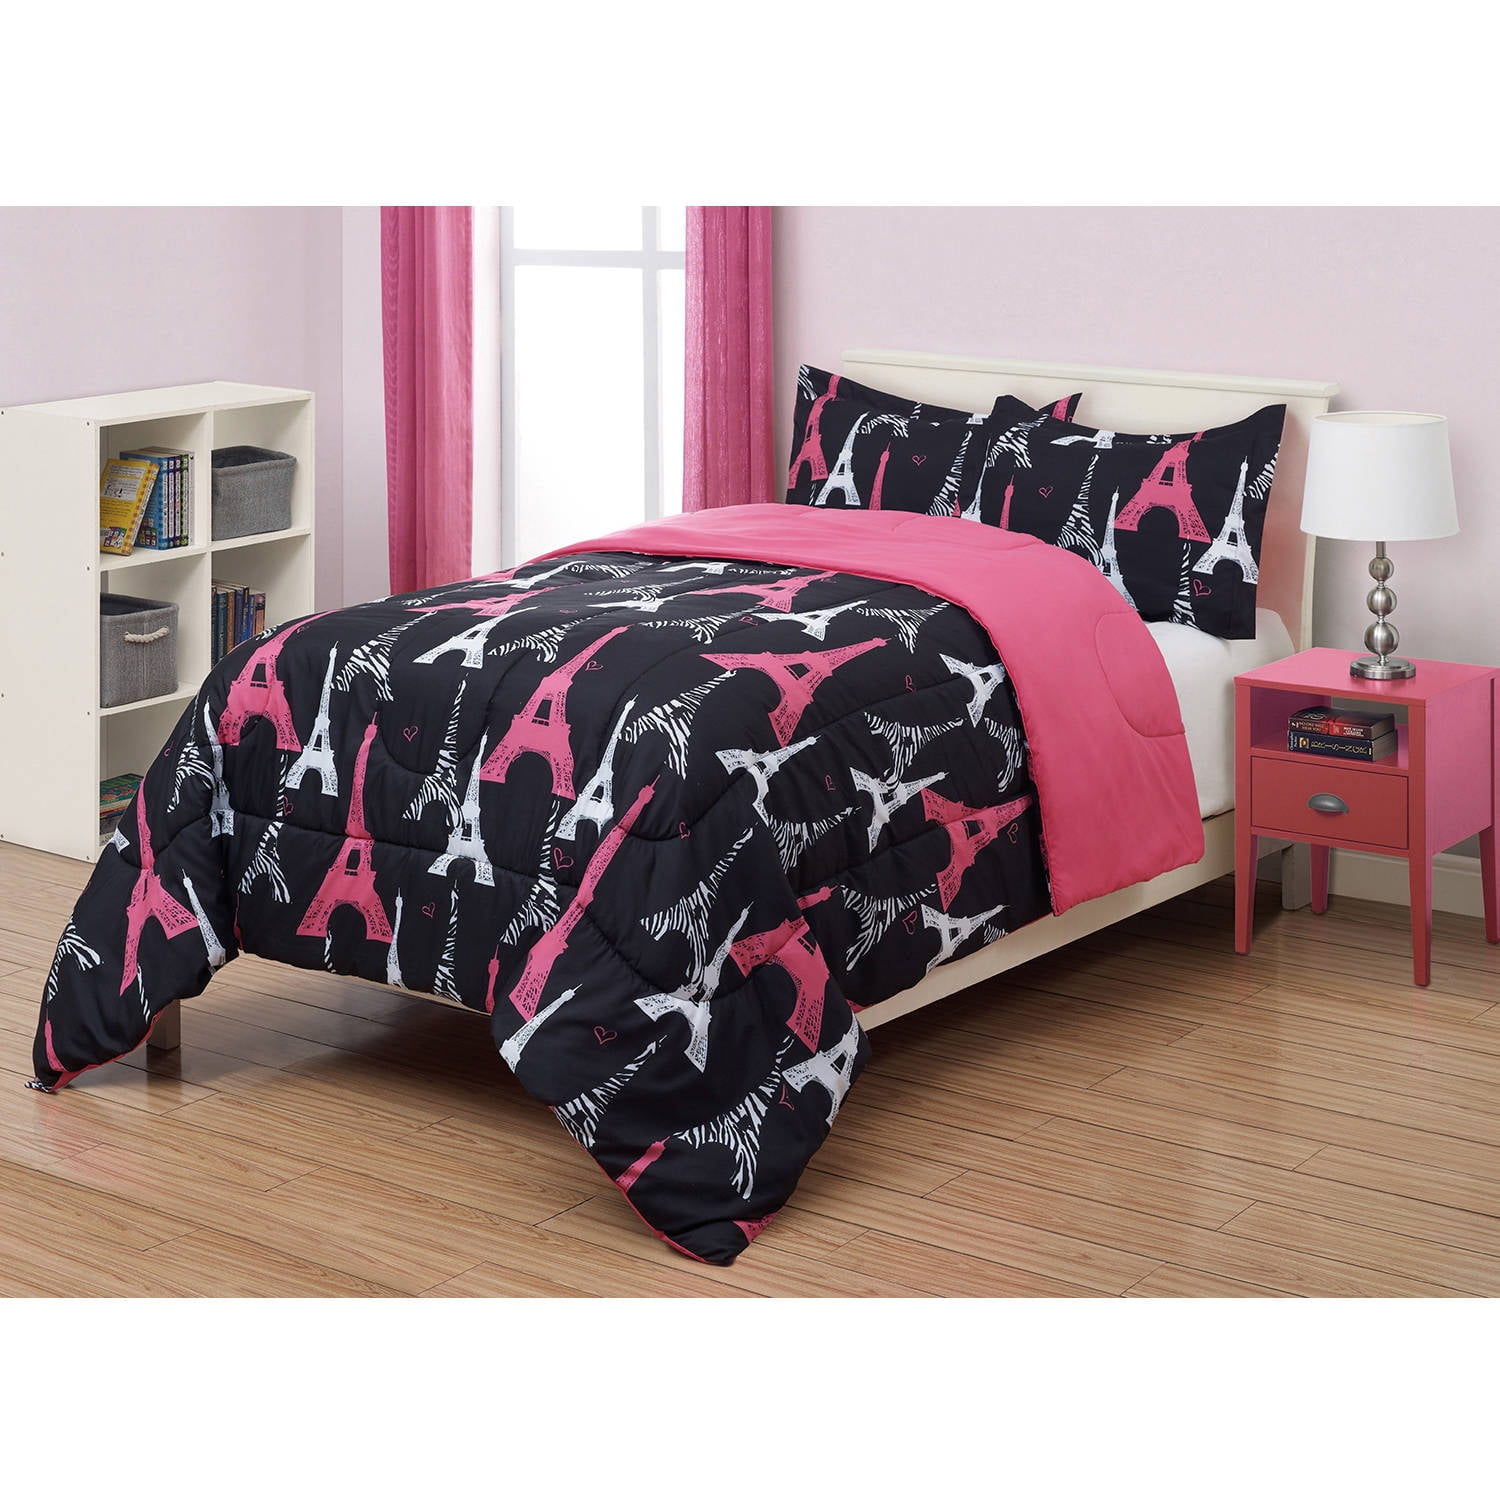 Pink Eiffel Tower Themed Girls Boys Bedding 3 PCS Full/Queen Size Bedspread/Coverlet Set With Love From Paris Bedding 